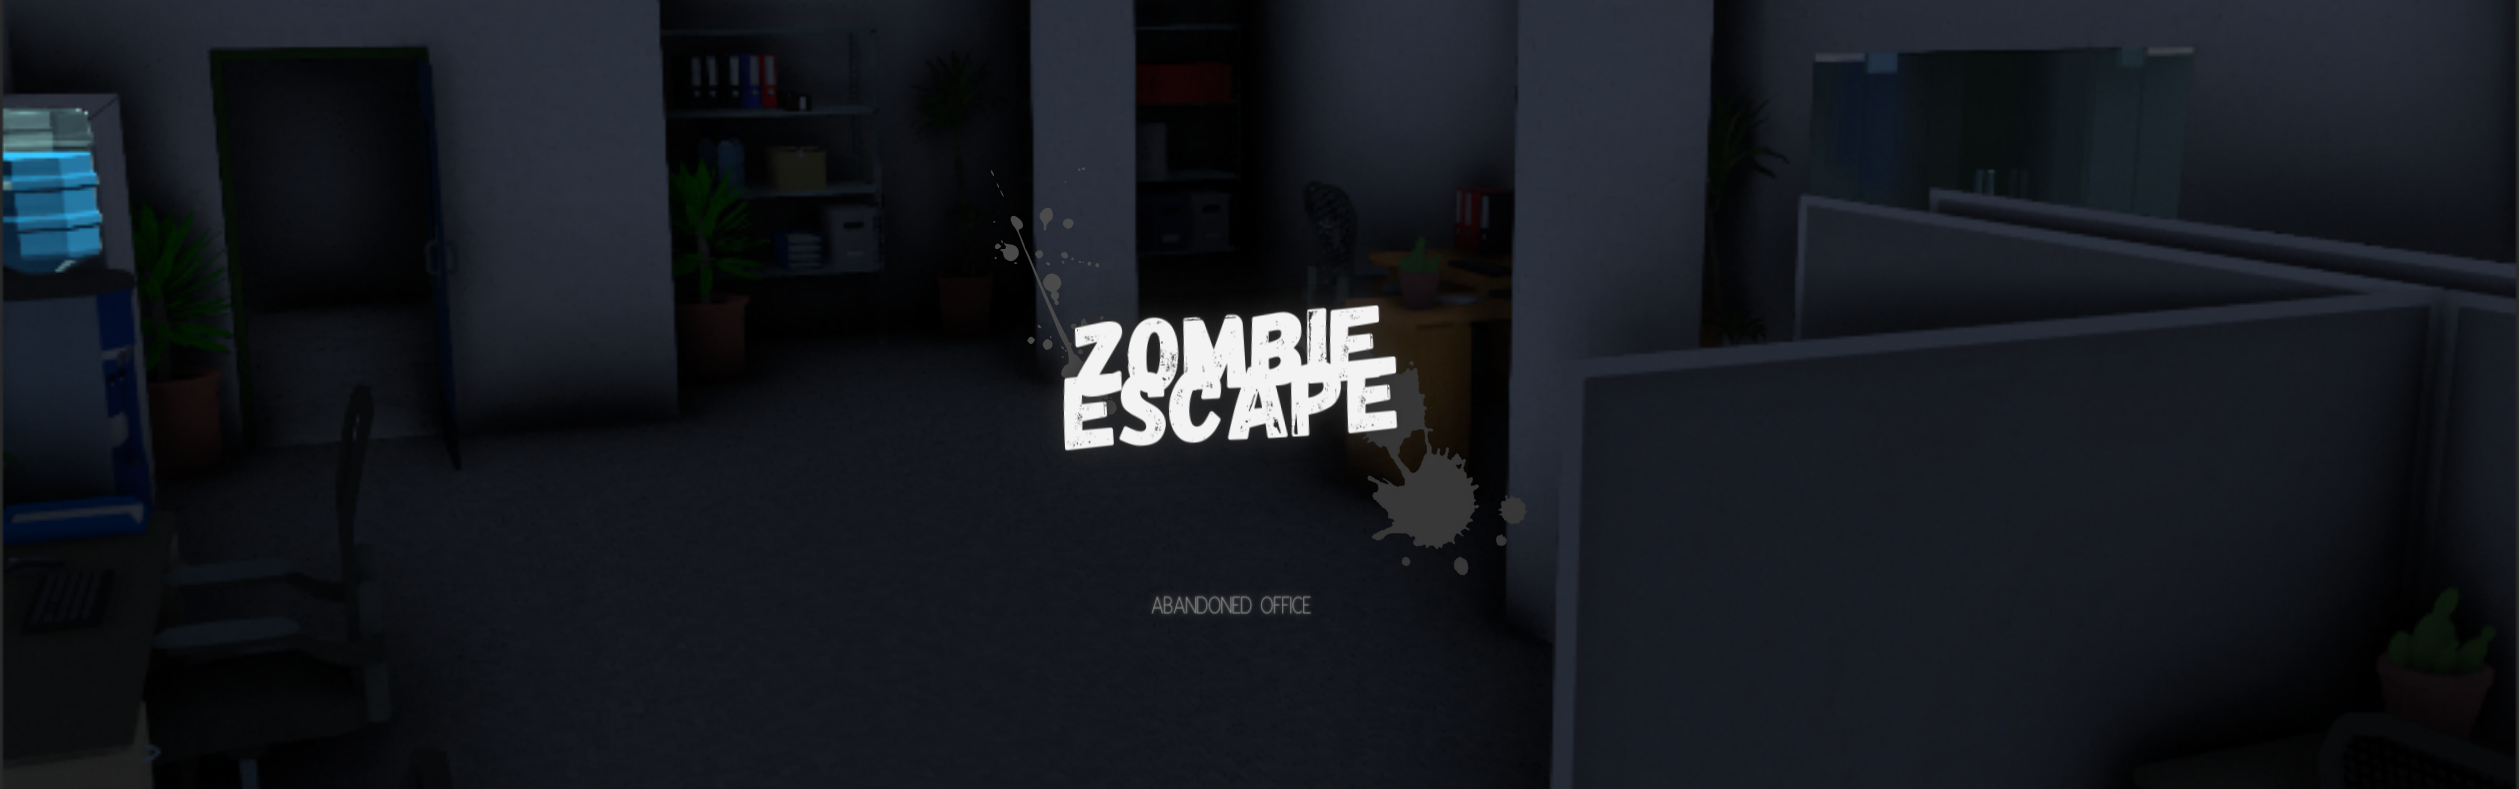 Zombie Escape - Abandoned Office - Early Access